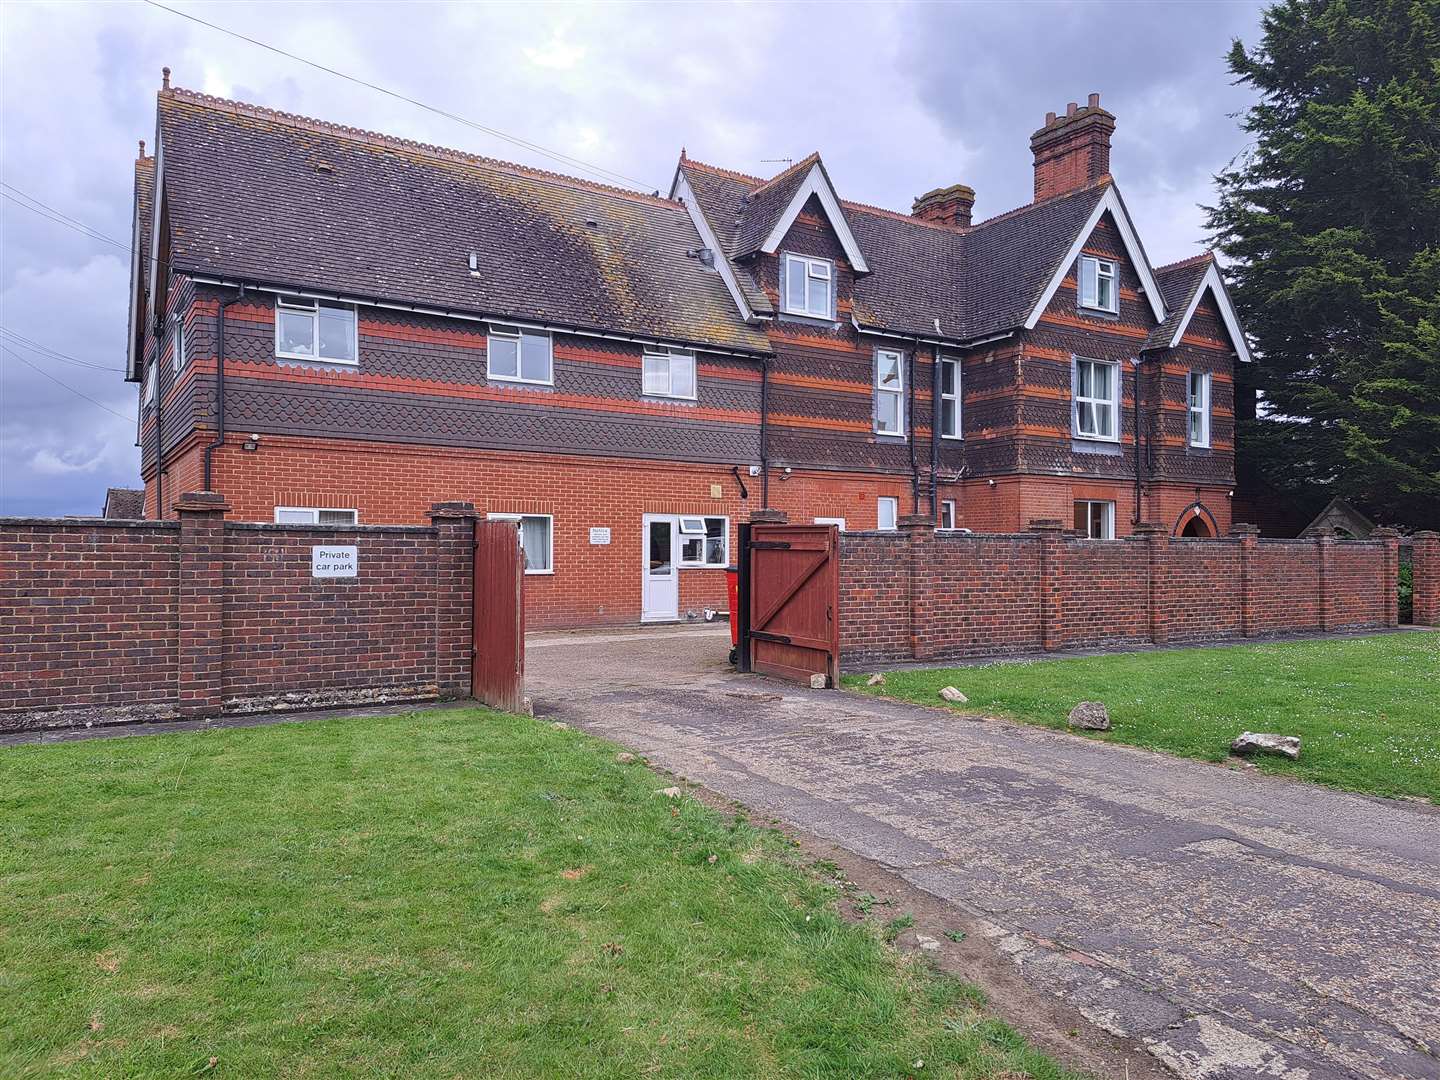 The Vale care home could be turned into flats